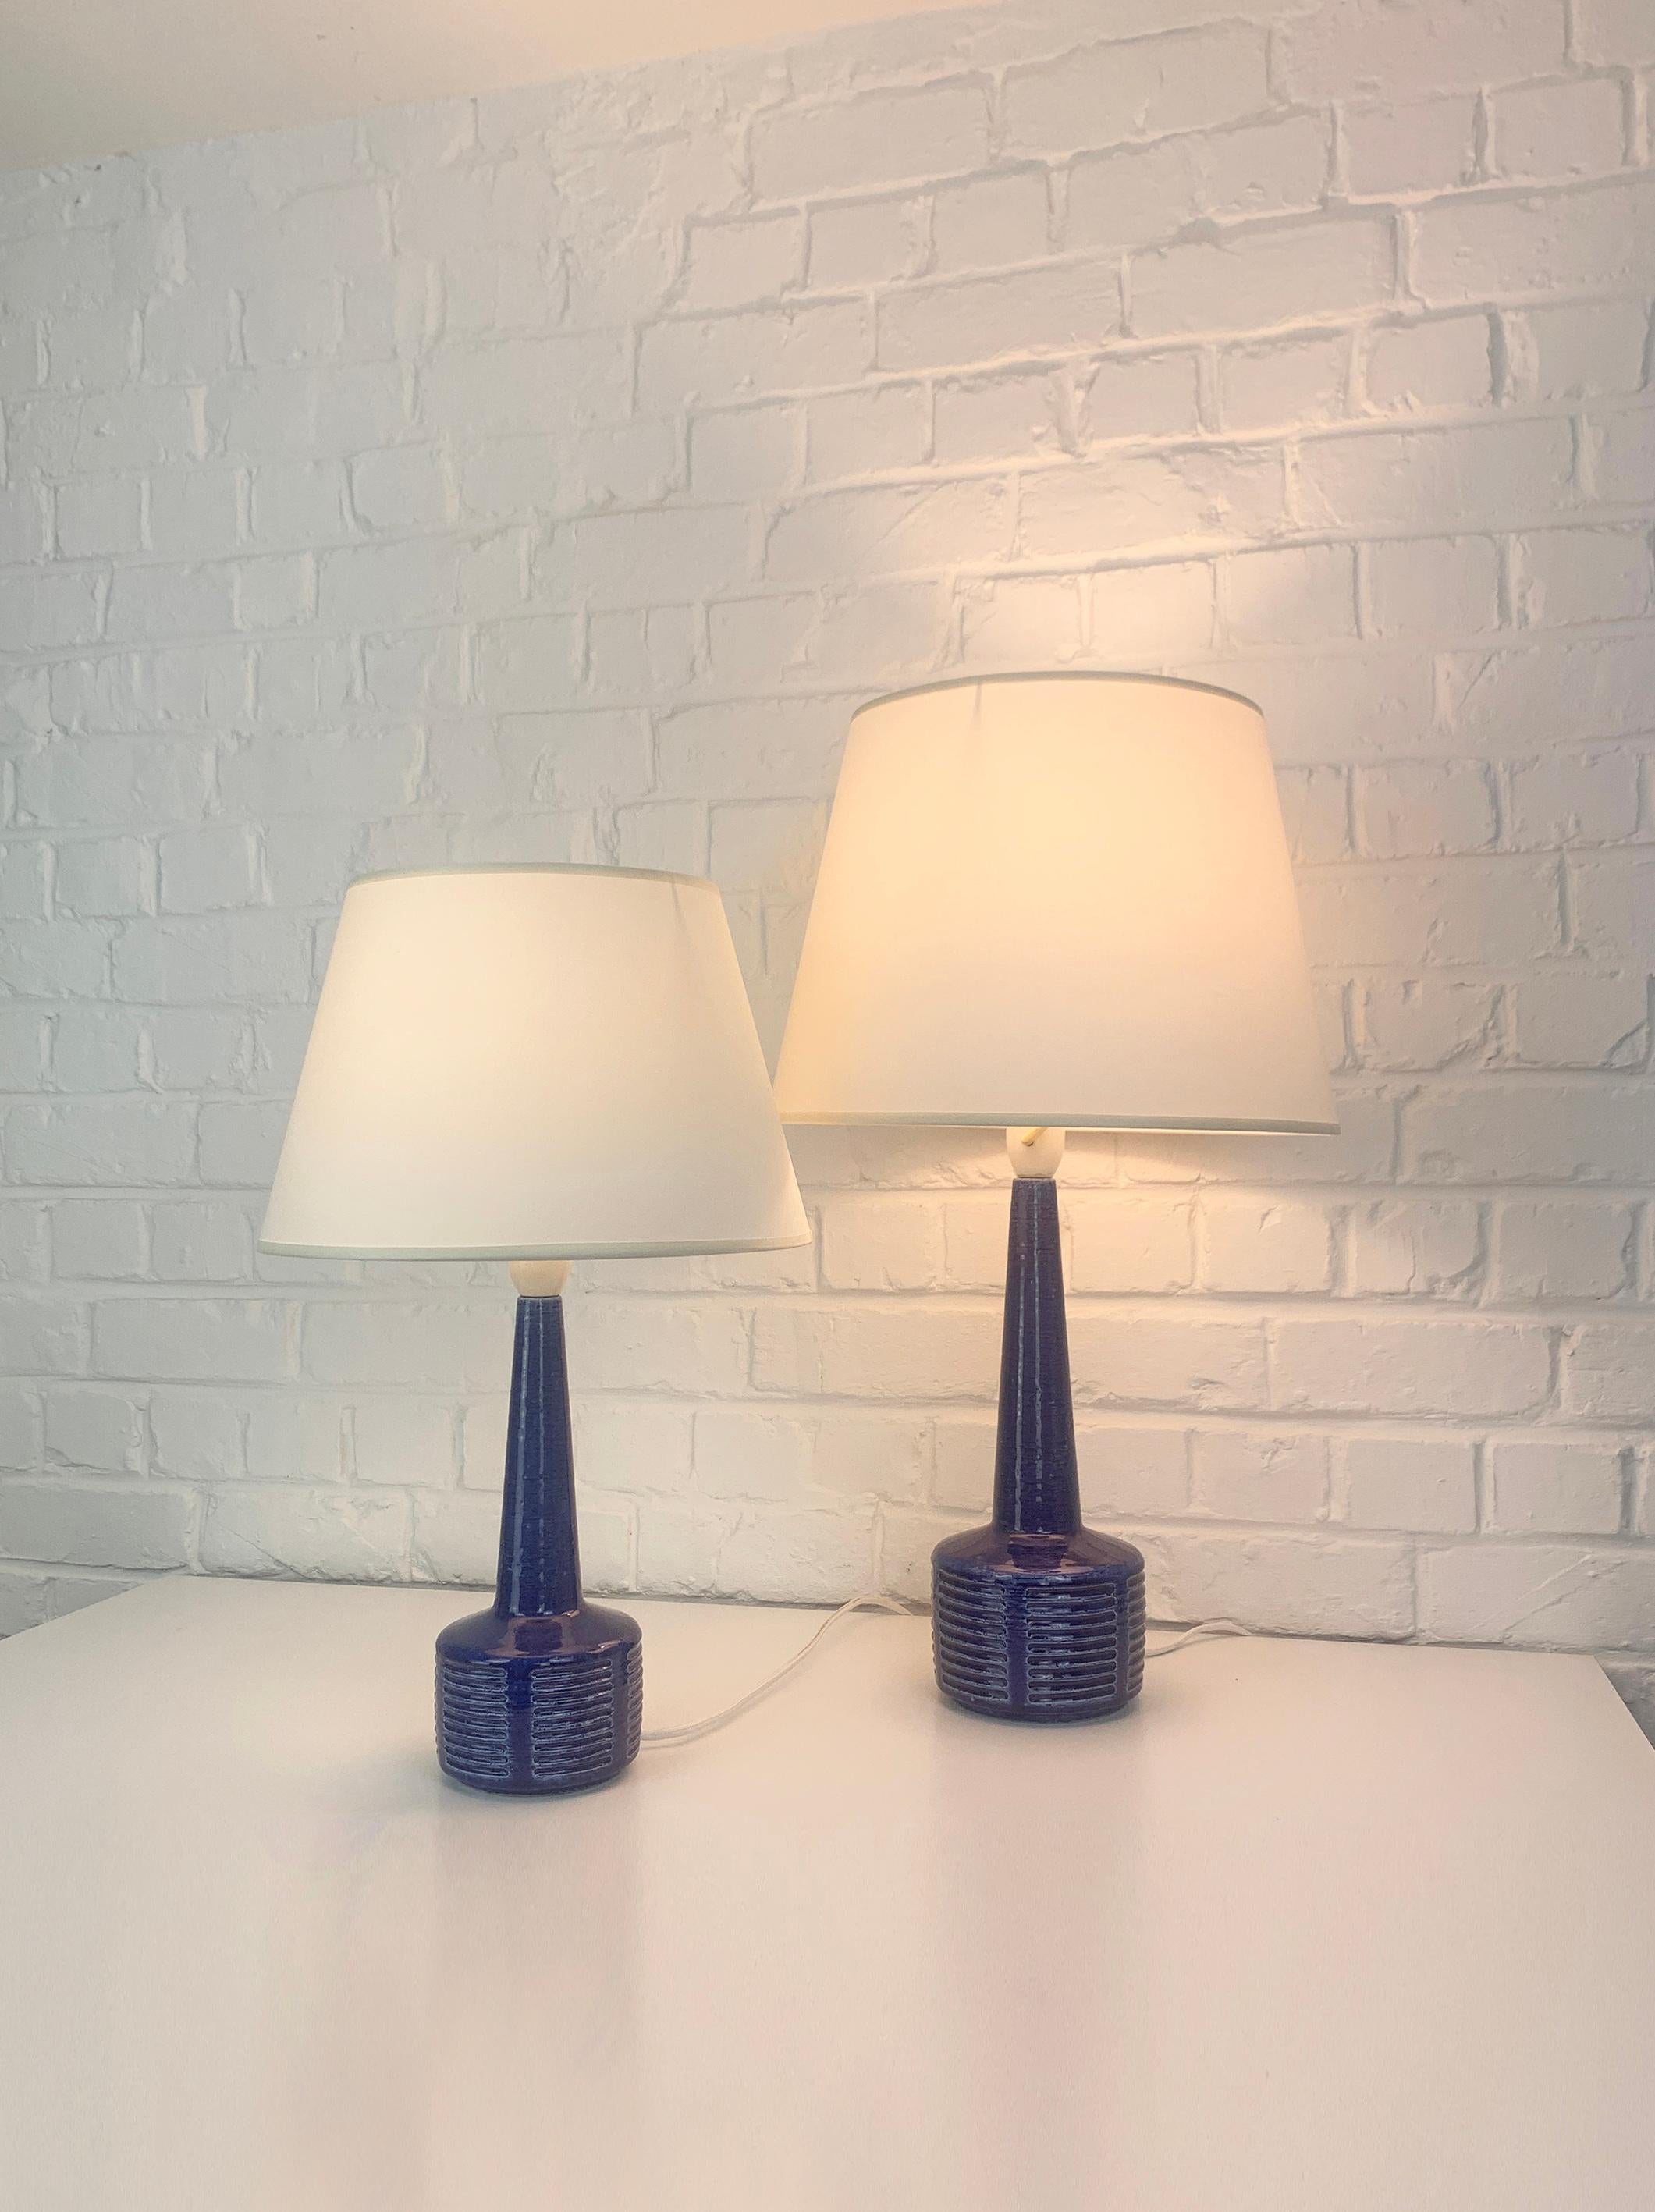 Pair of stoneware table lamps, model DL34 and DL35, produced by Palshus (Denmark). 

The lamp bases are finished with a blue glaze and an impressed pattern. The chamotte clay gives a natural and living surface. Both are signed under the base (PLS